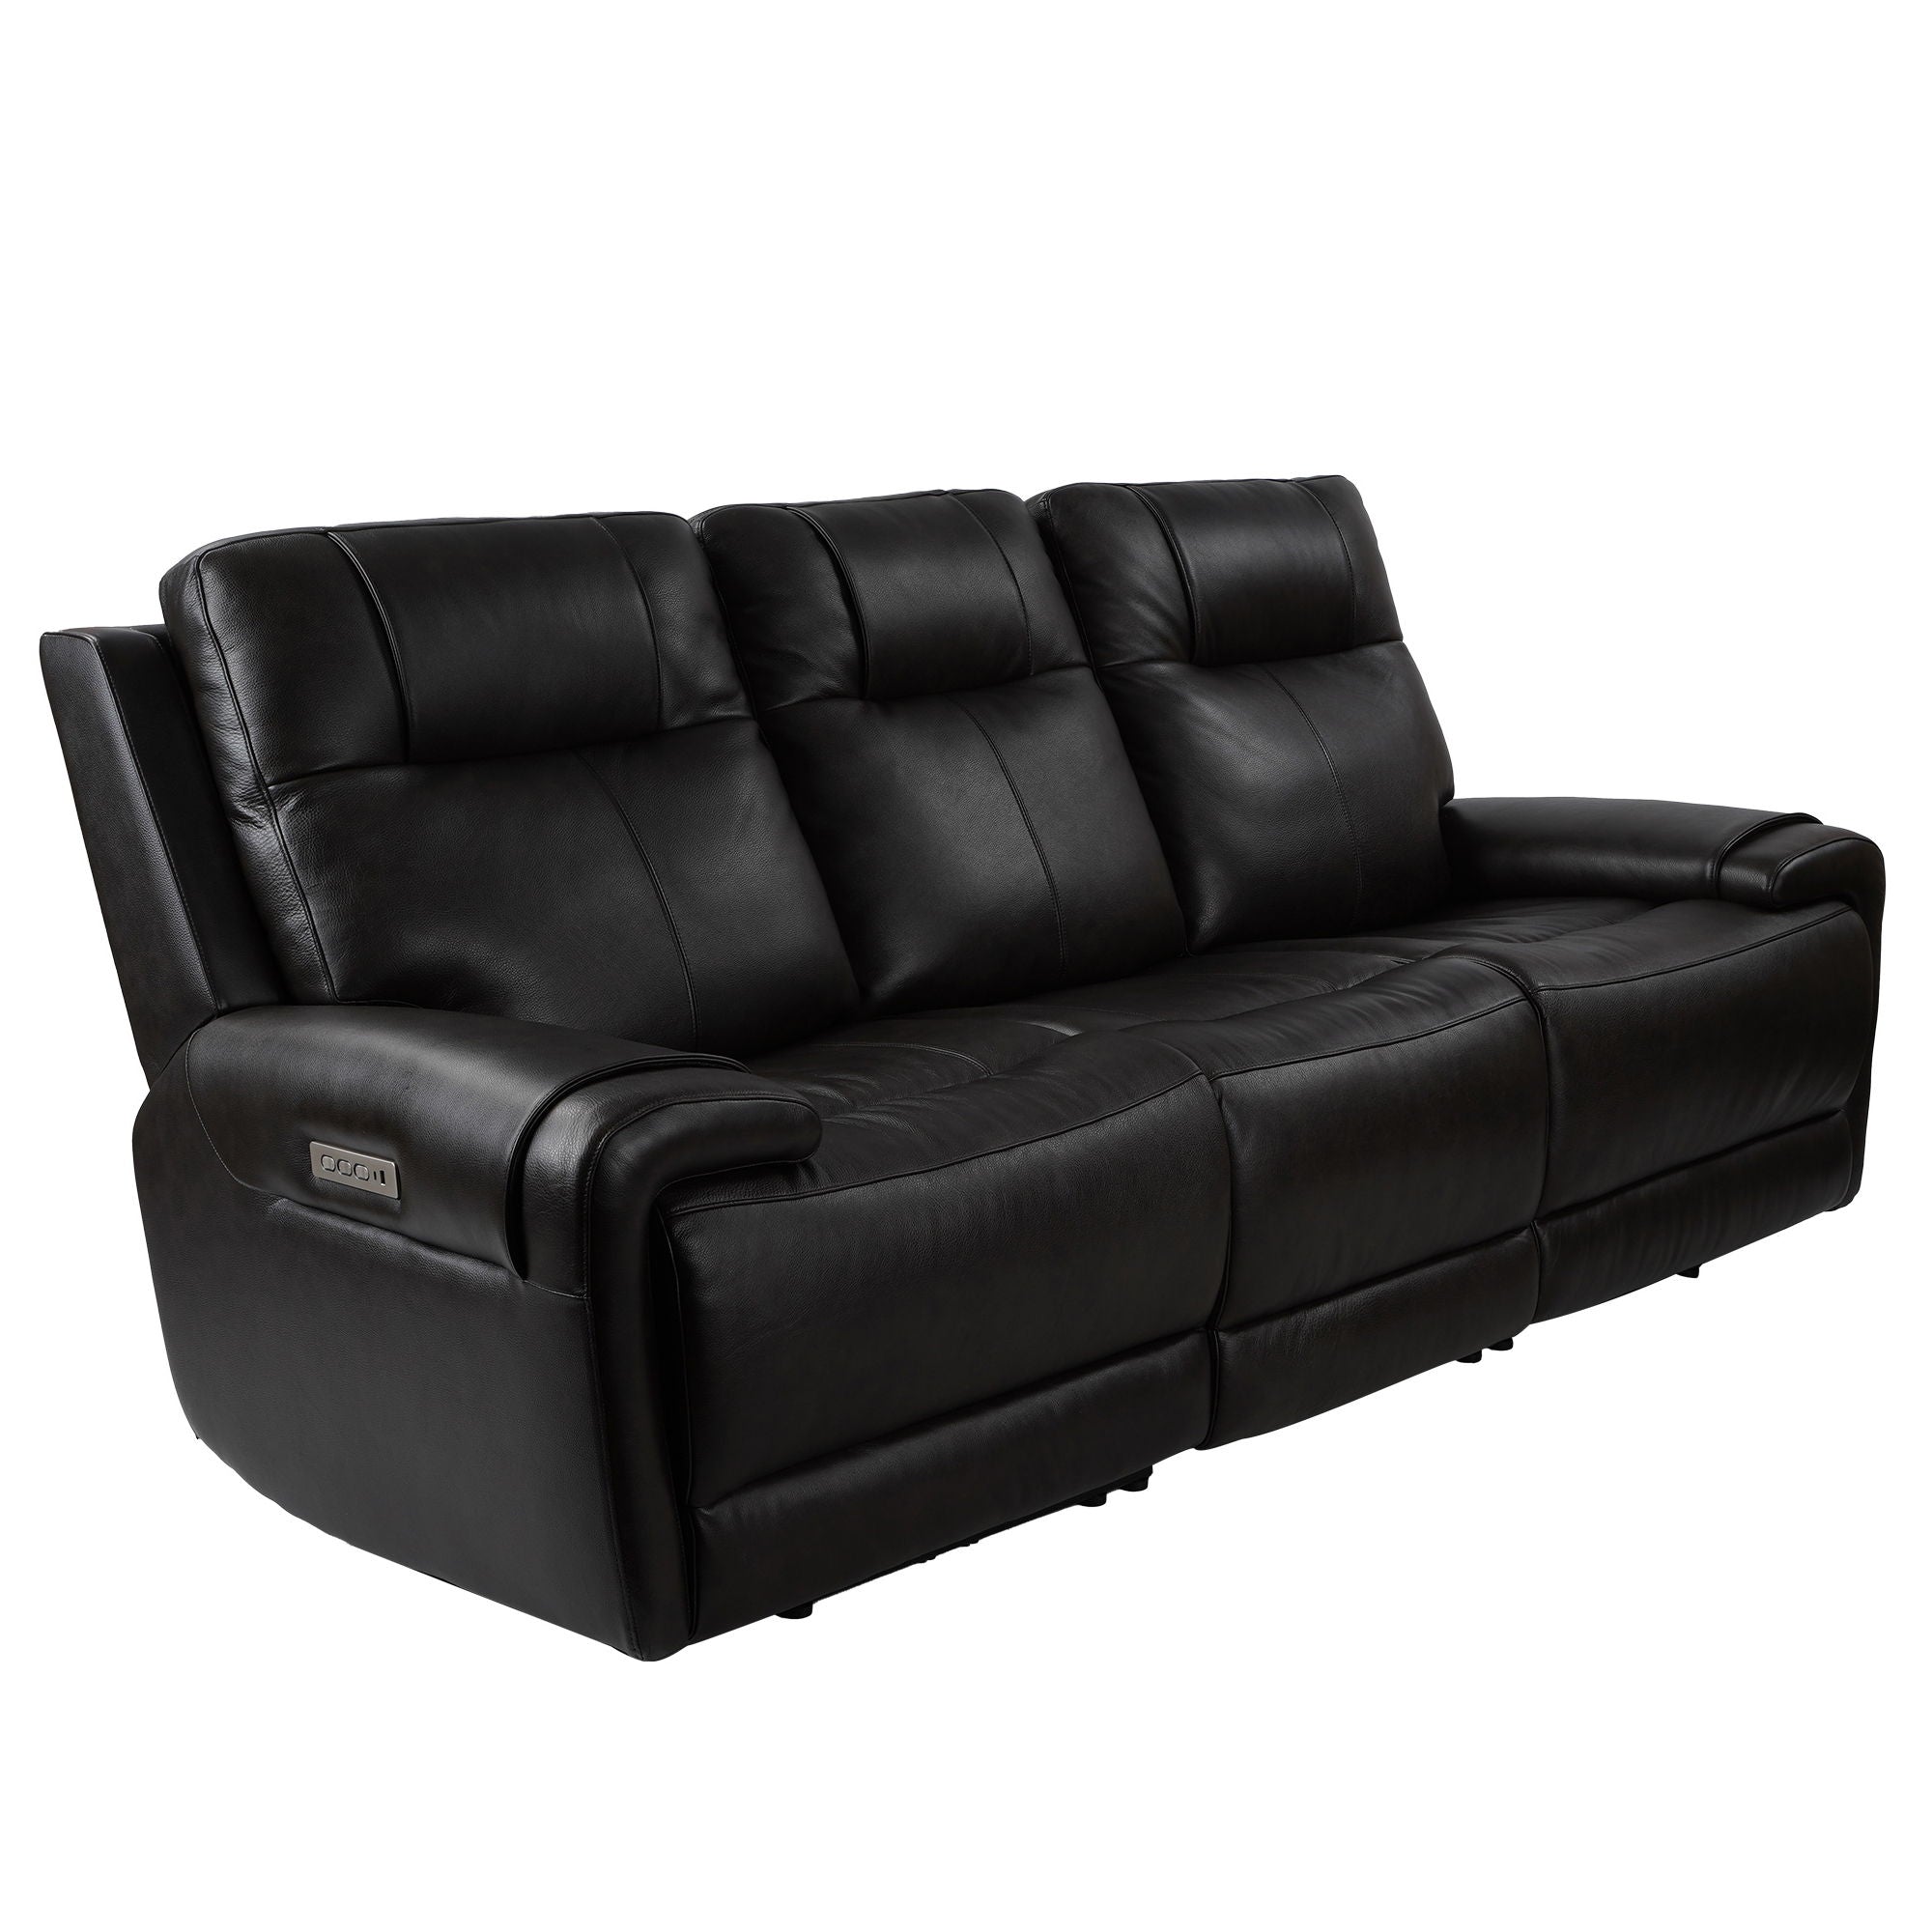 Trevor Triple Power Sofa, Genuine Leather, Lumbar Support, Adjustable Headrest, USB & Type C Charge Port, Middle Armless Chair With Triple Power